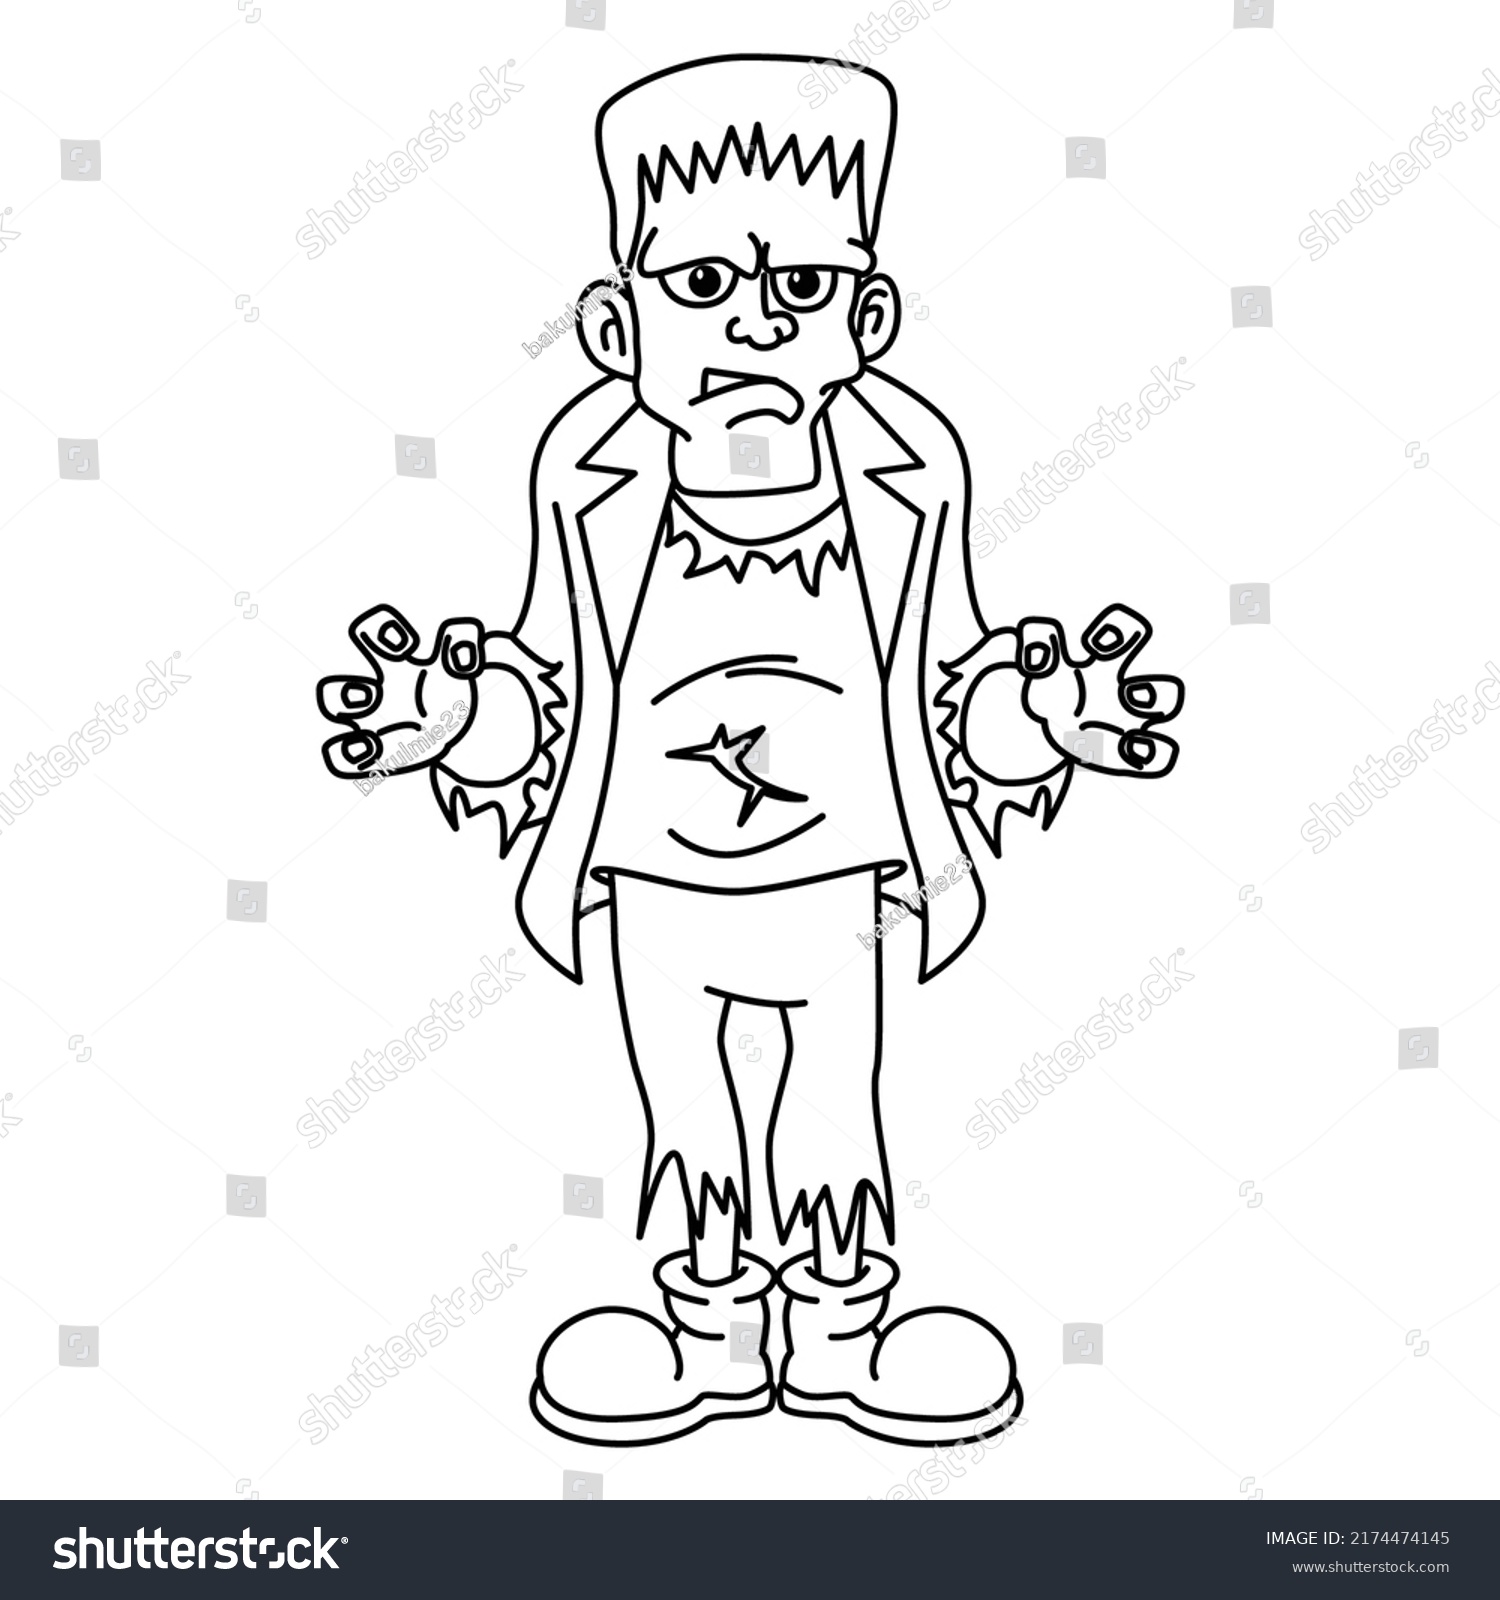 Cute Frankenstein Cartoon Coloring Page Illustration Stock Vector ...